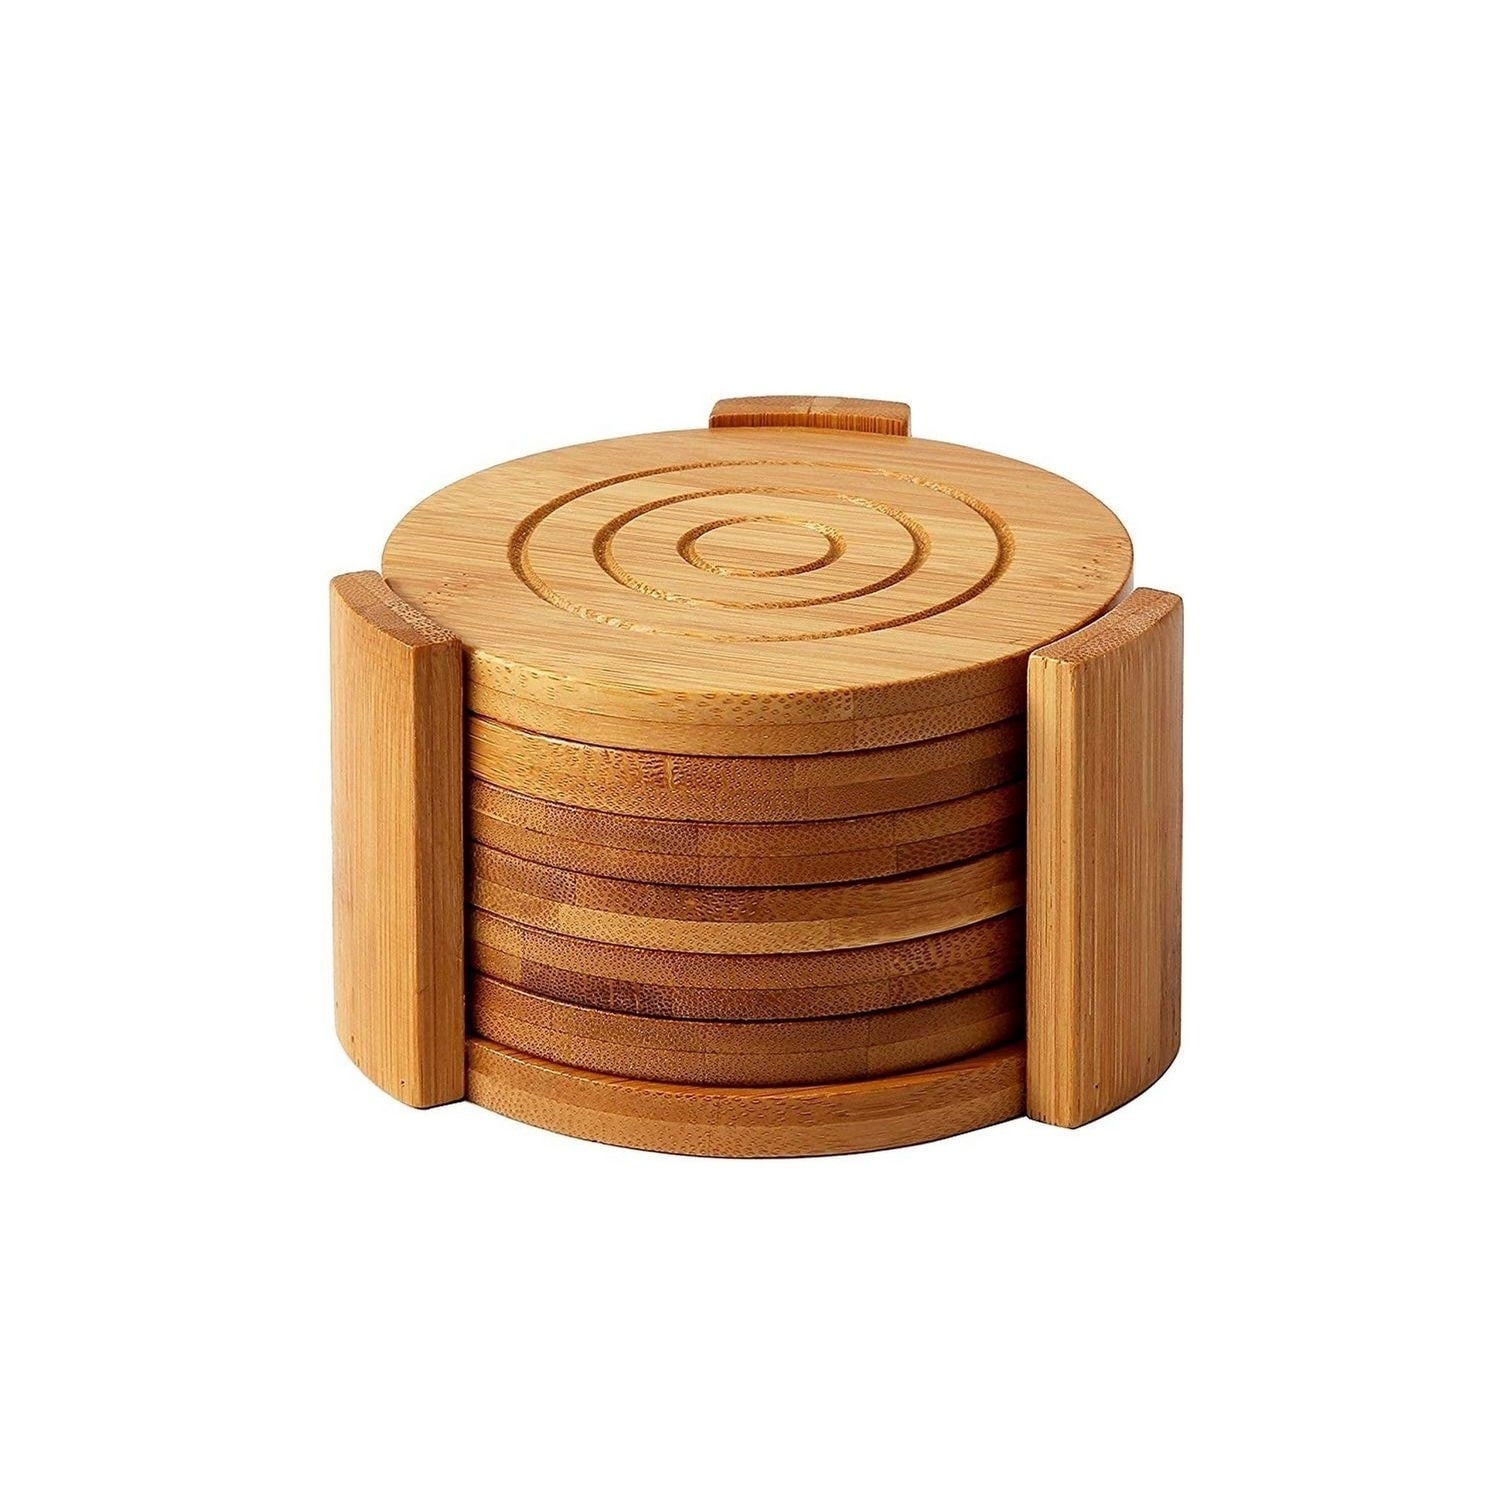 DESIGNER COASTER SET OF 6 BEAUTIFUL WOODEN COASTERS WITH PROPER COASTER  STAND